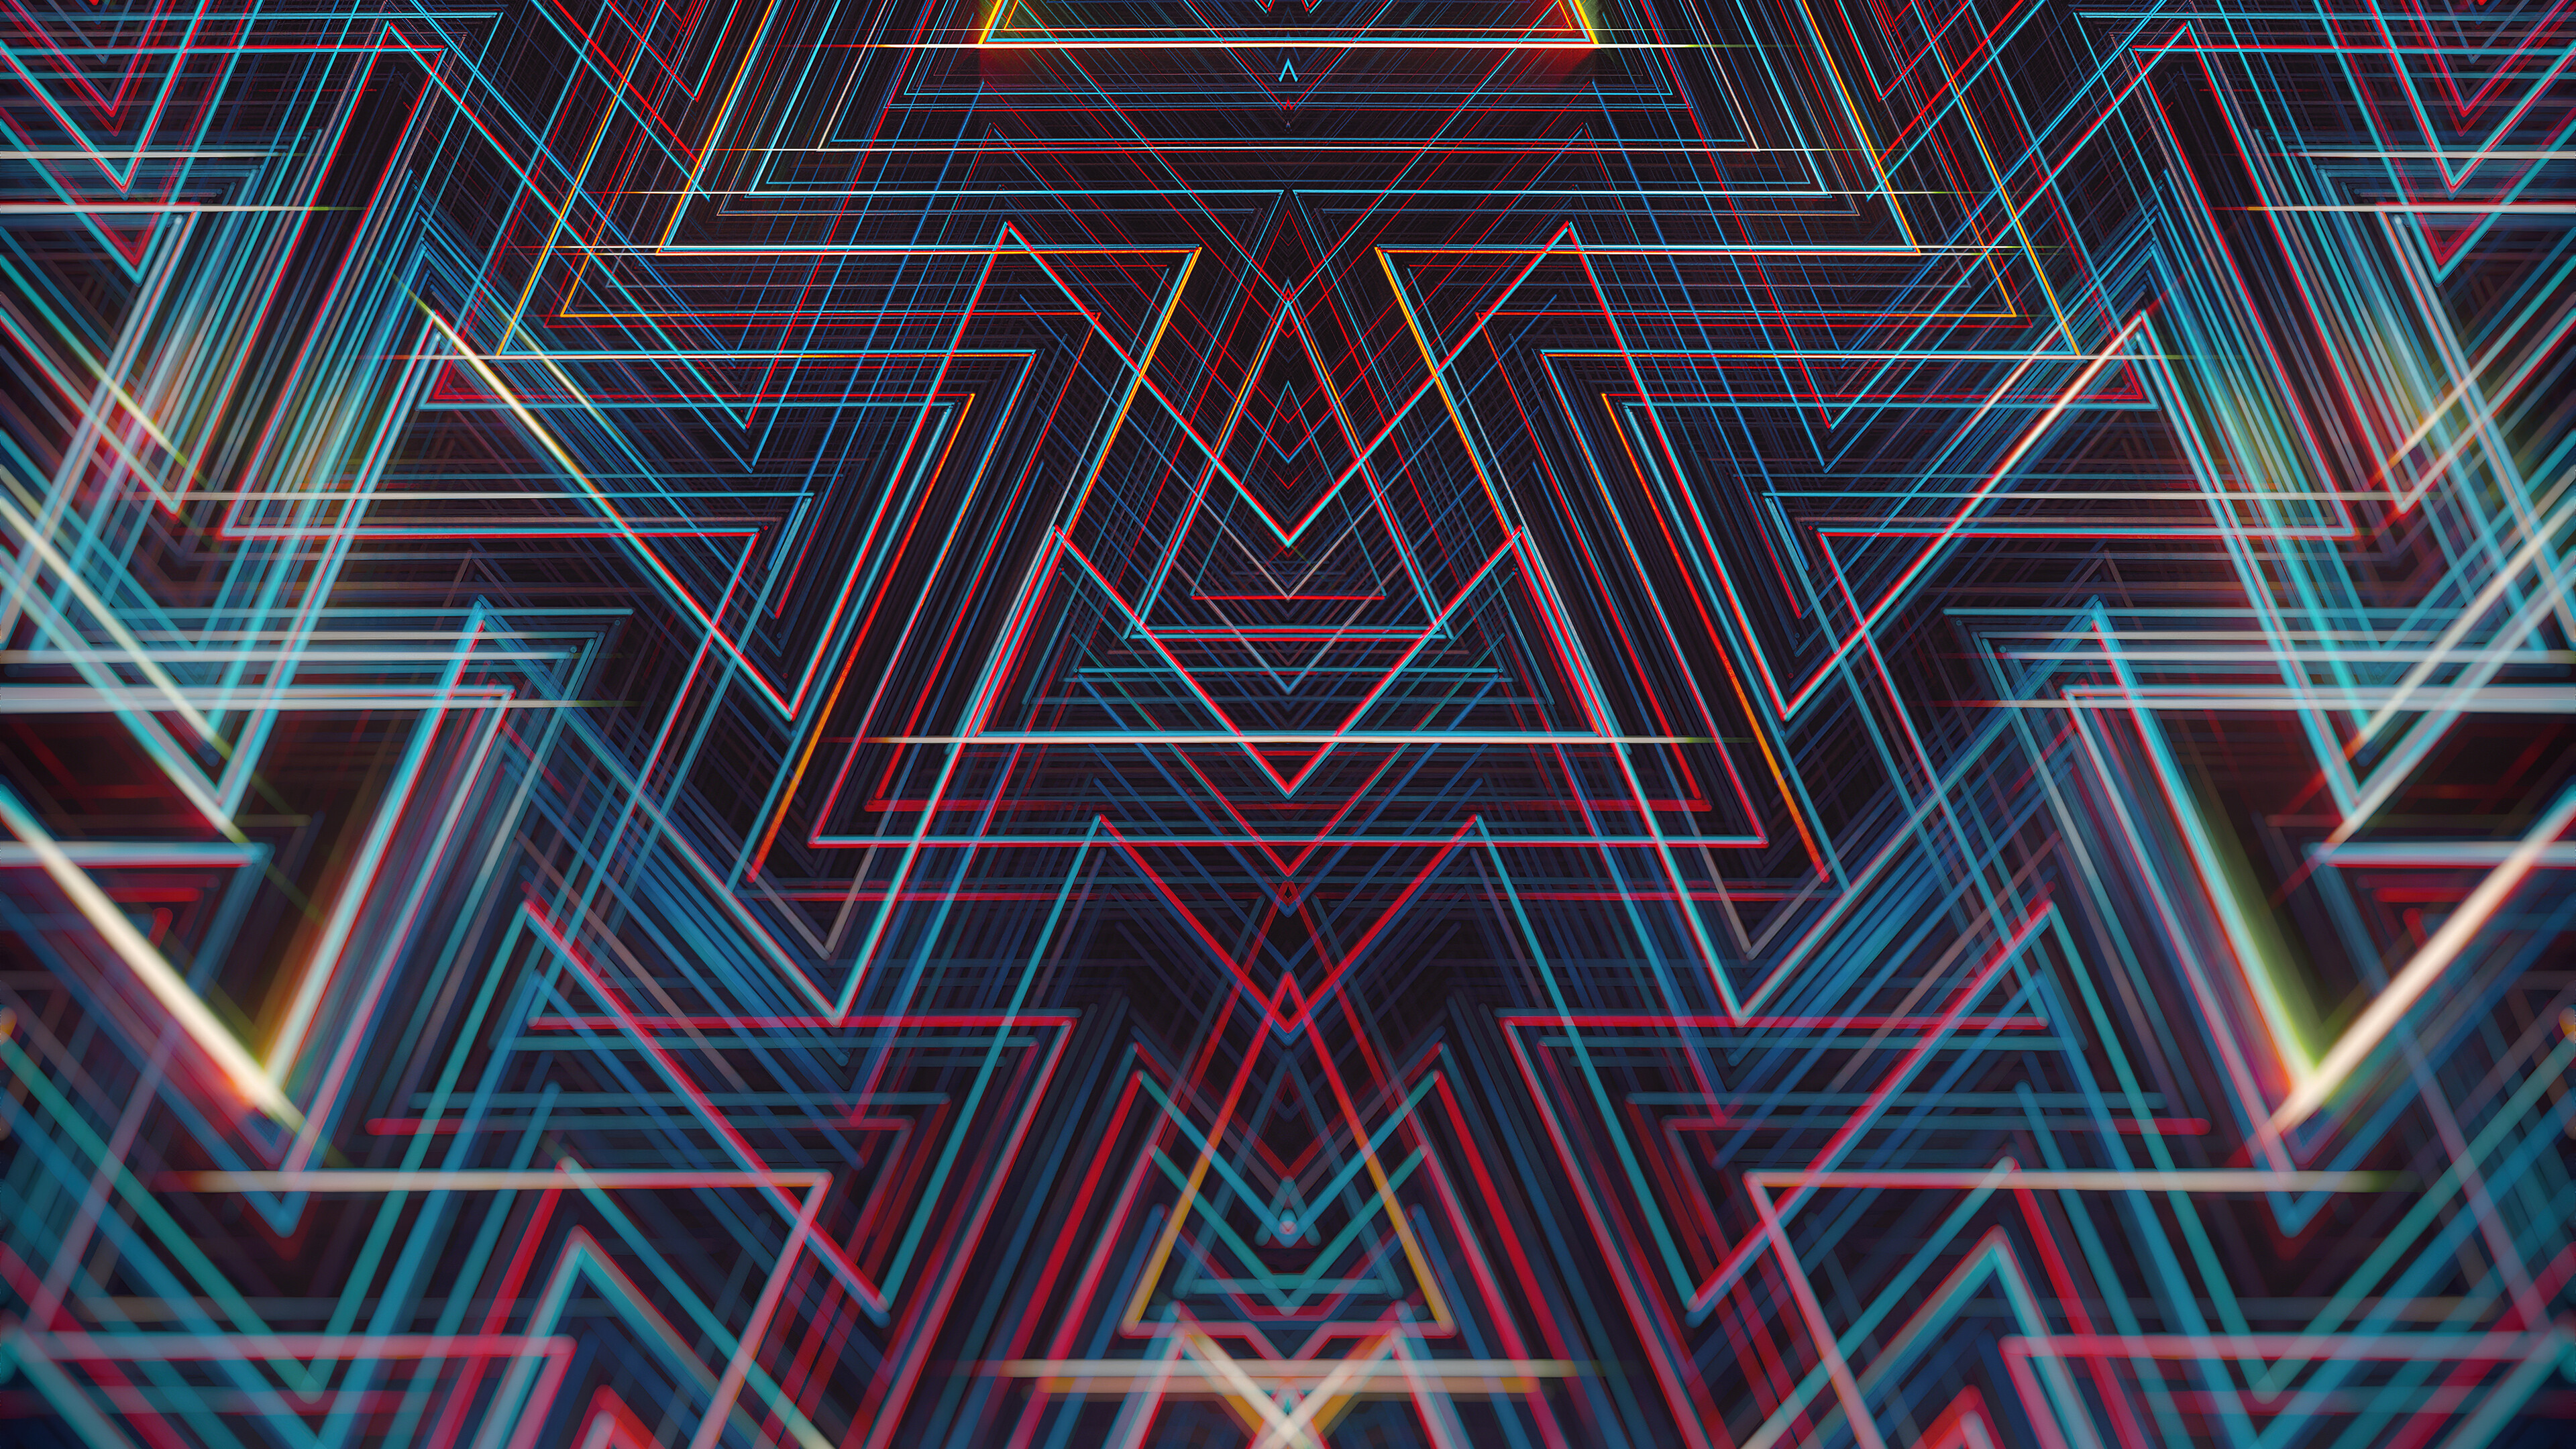 Geometric Abstract: Multicolored triangles, Acute angles, Equal sides. 3840x2160 4K Wallpaper.